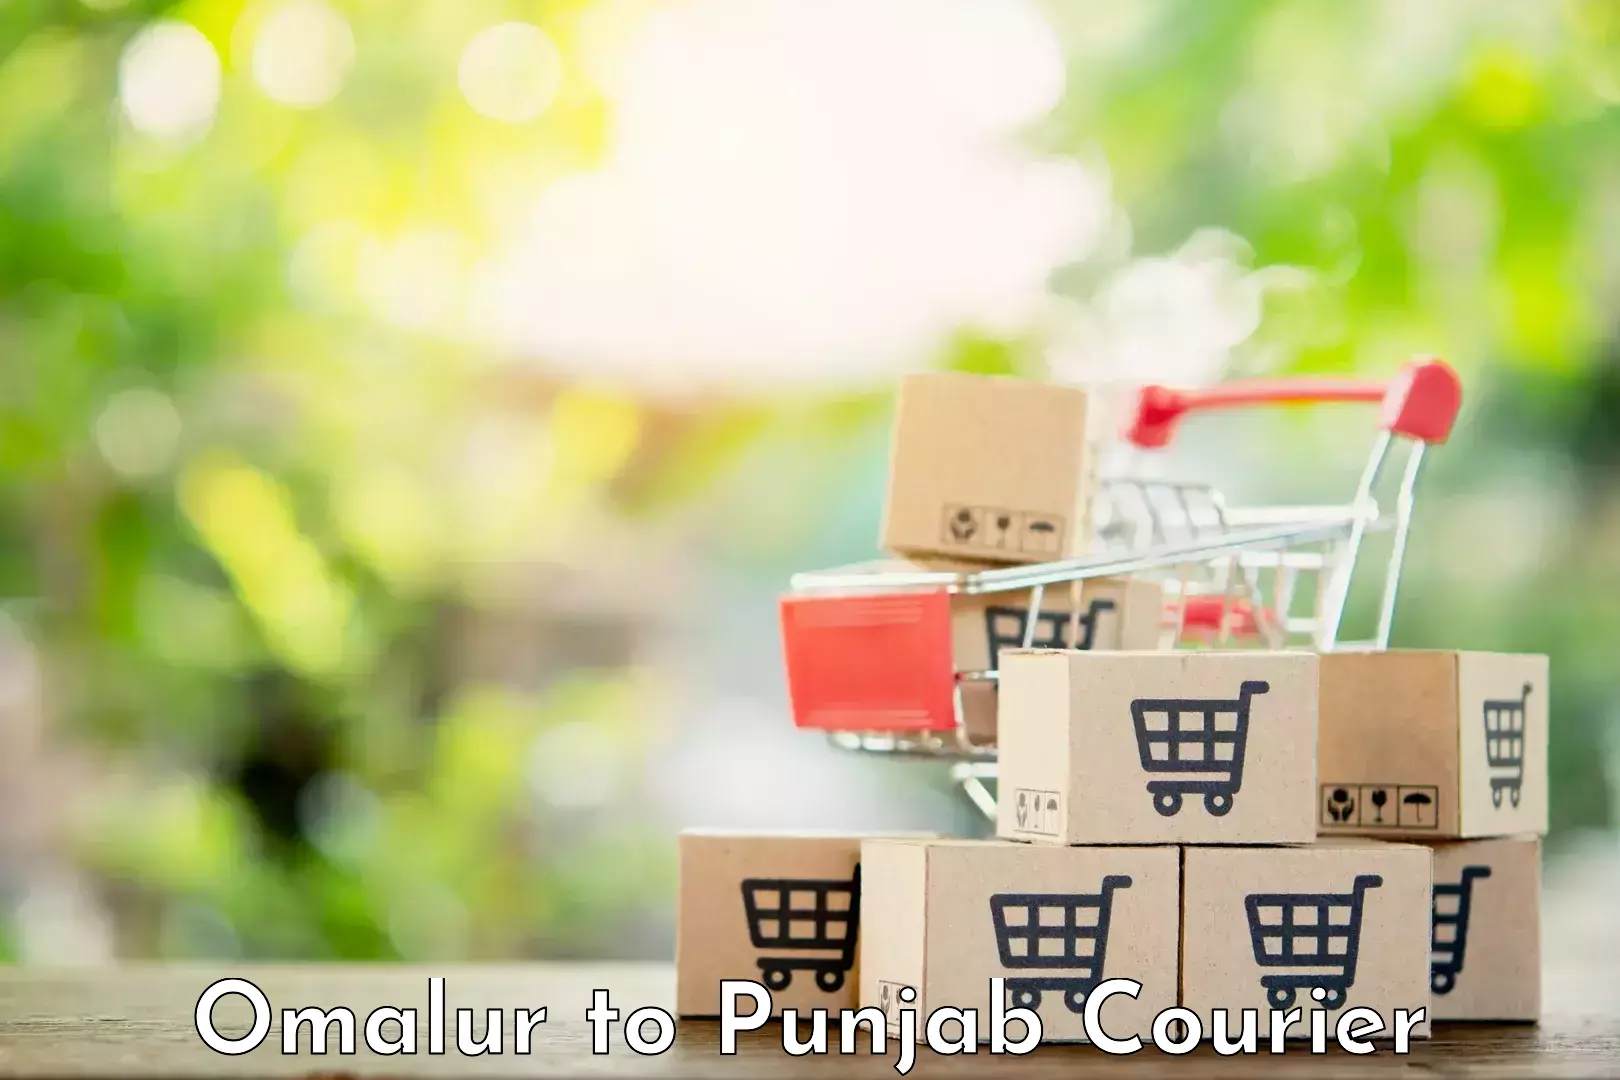 Courier service innovation in Omalur to Punjab